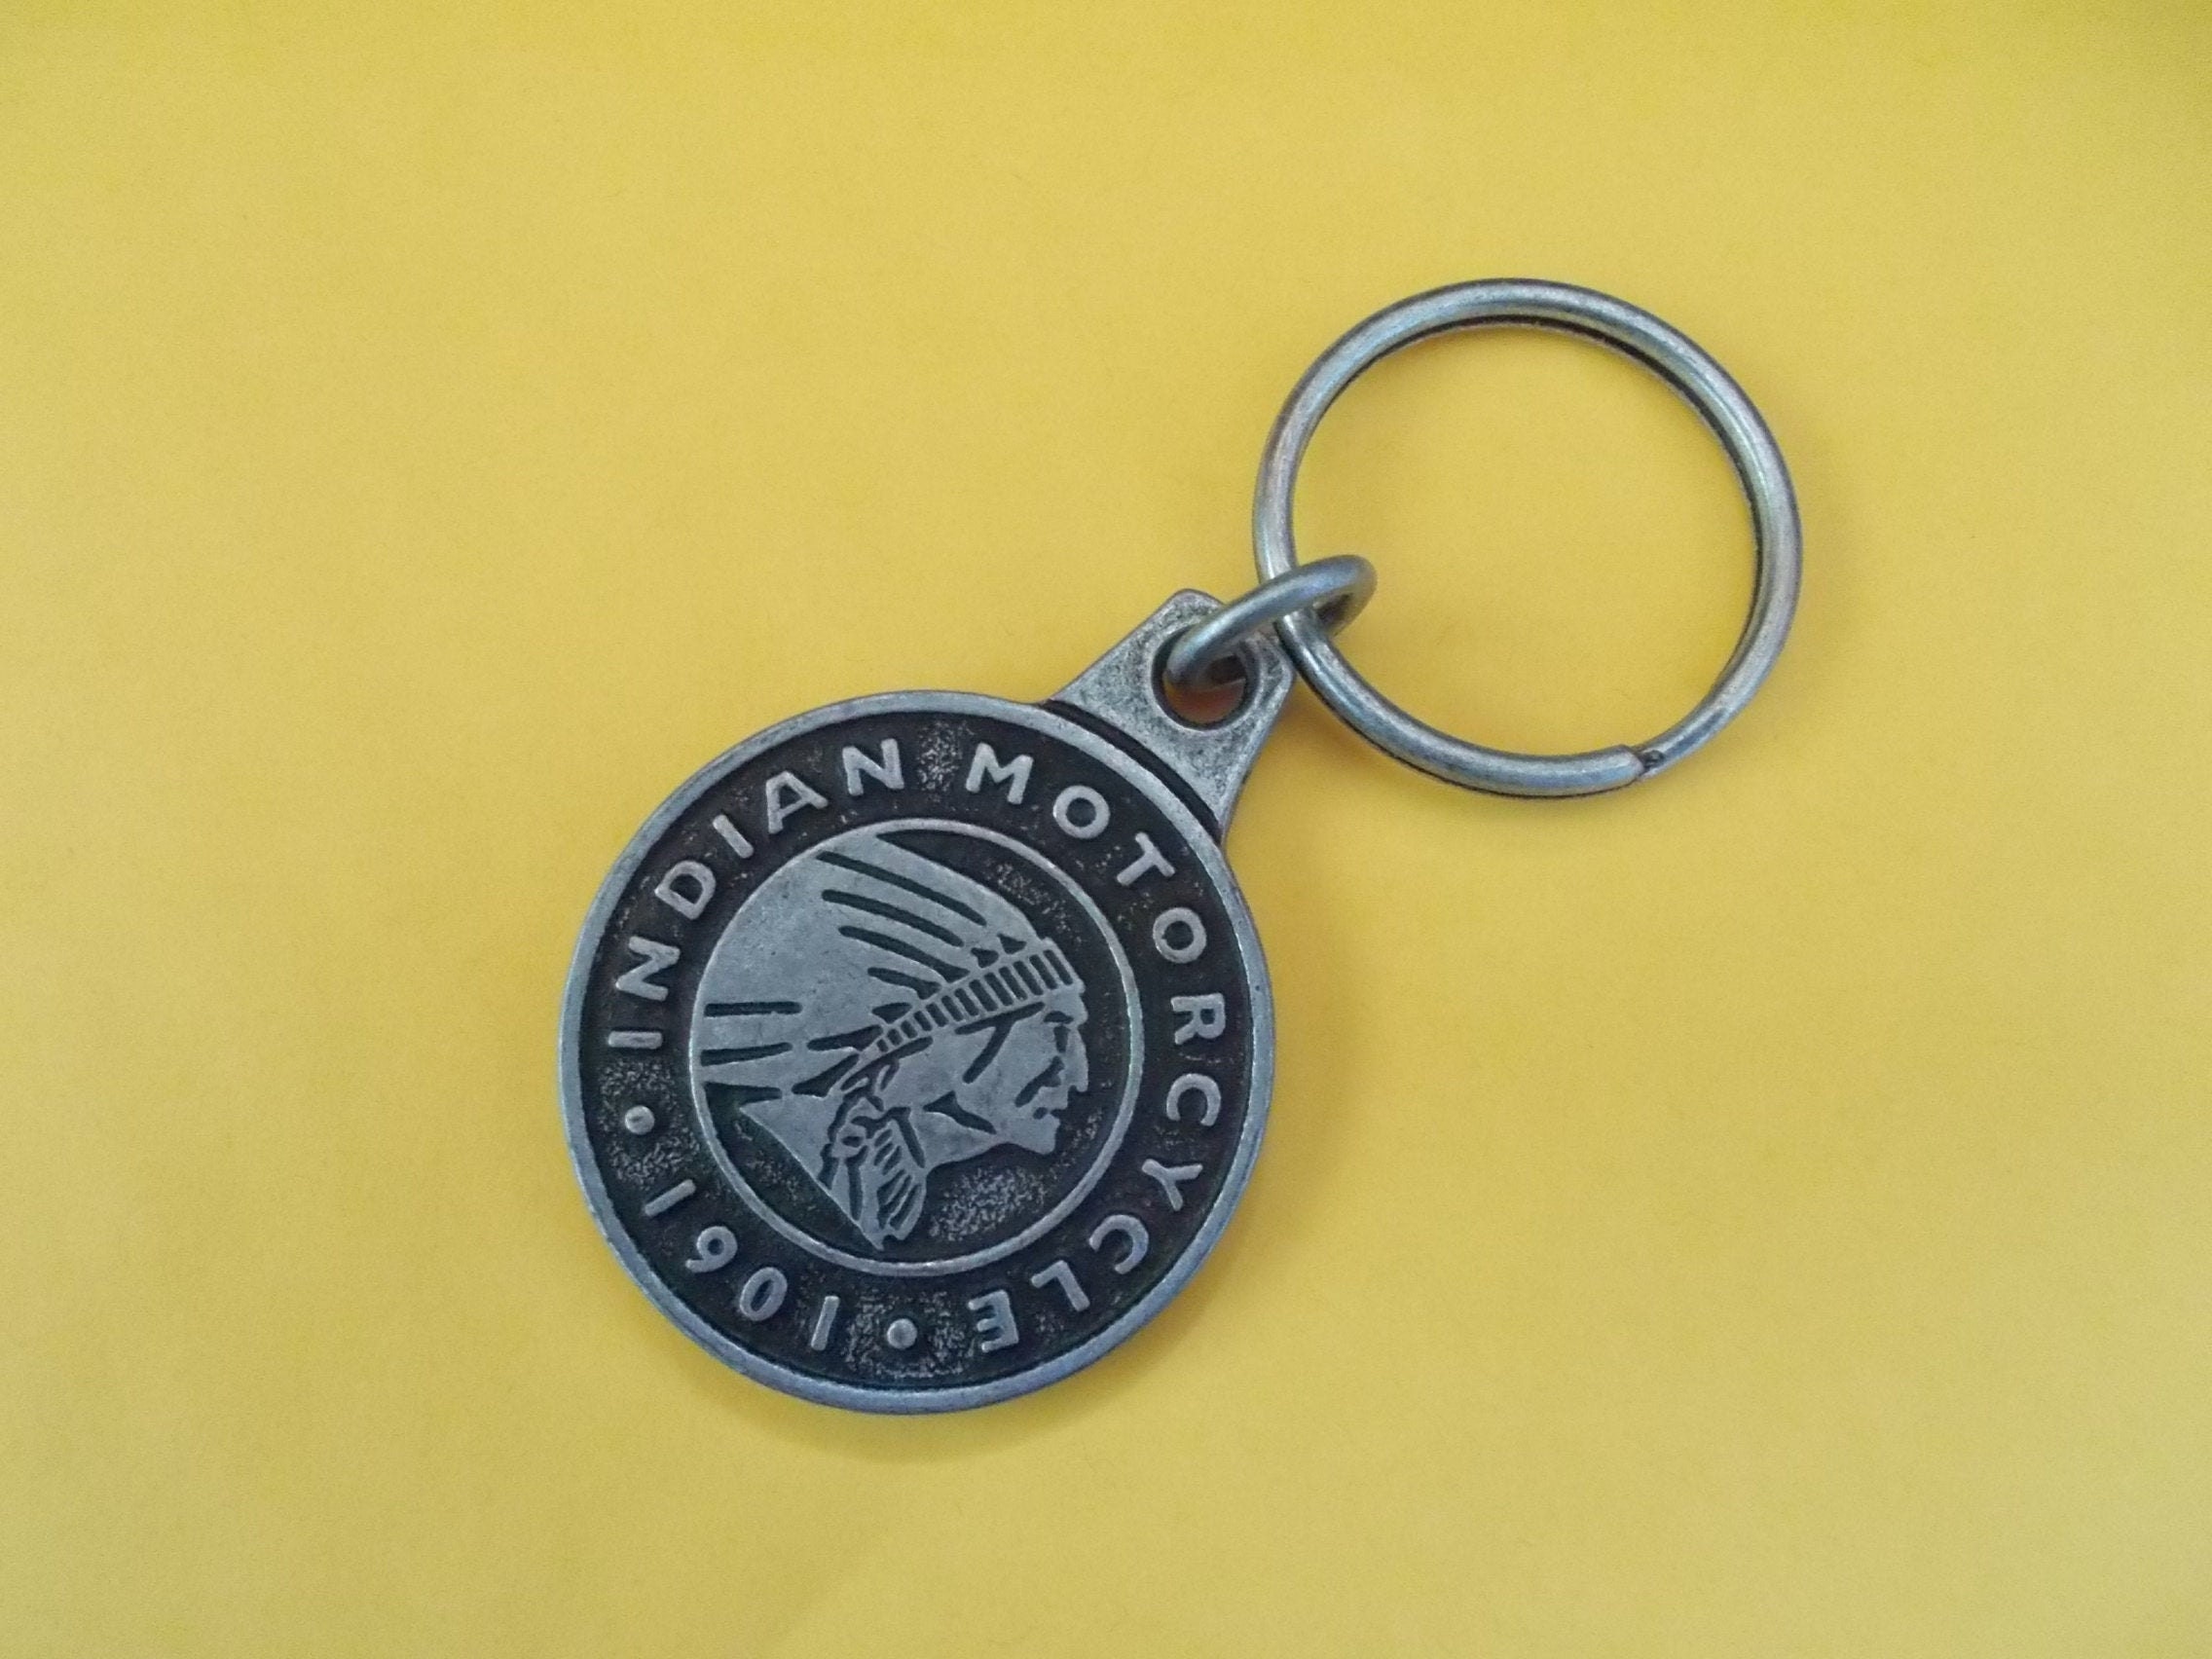 Indian Vintage Motorcycle Key Chain Ring Personalized